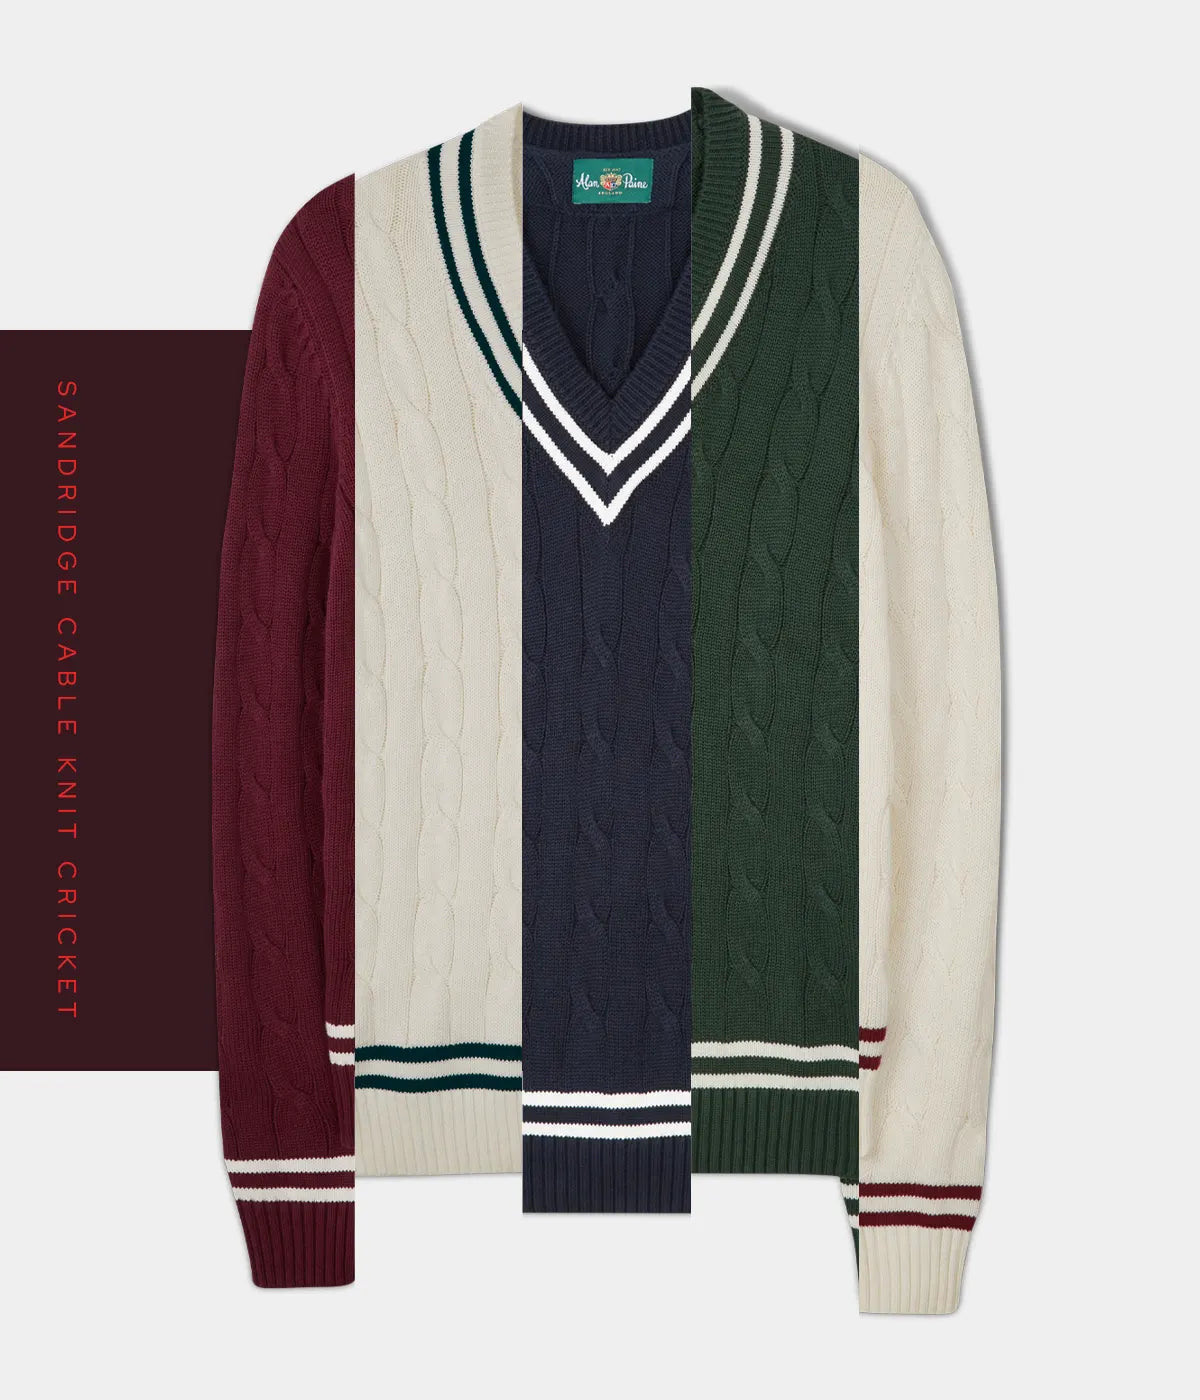 Cricket Jumpers